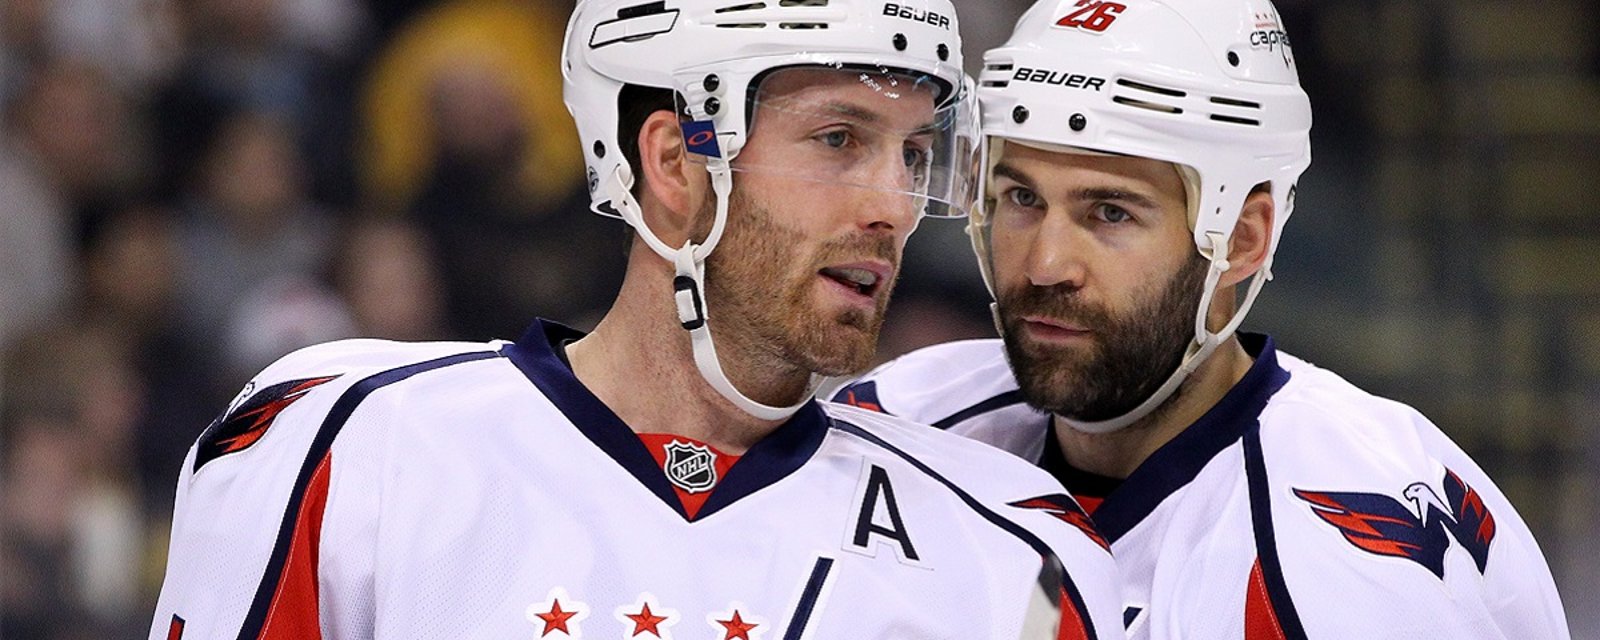 Veteran defenseman could be free agent after buyout this summer.